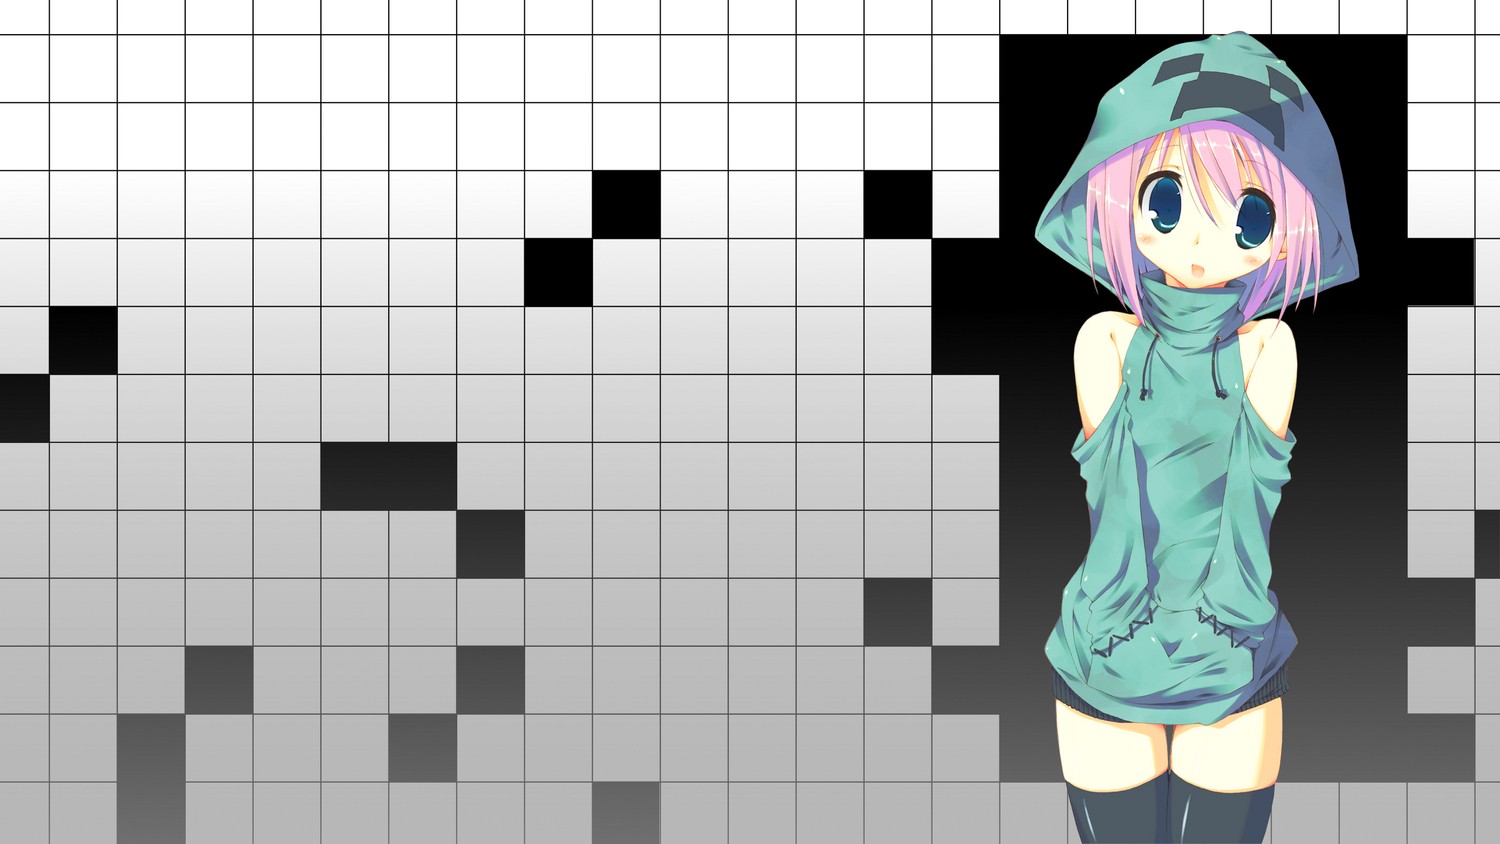 Anime 1500x844 Minecraft creeper anime girls blue eyes pink hair thigh-highs PC gaming video games anime texture hoods standing